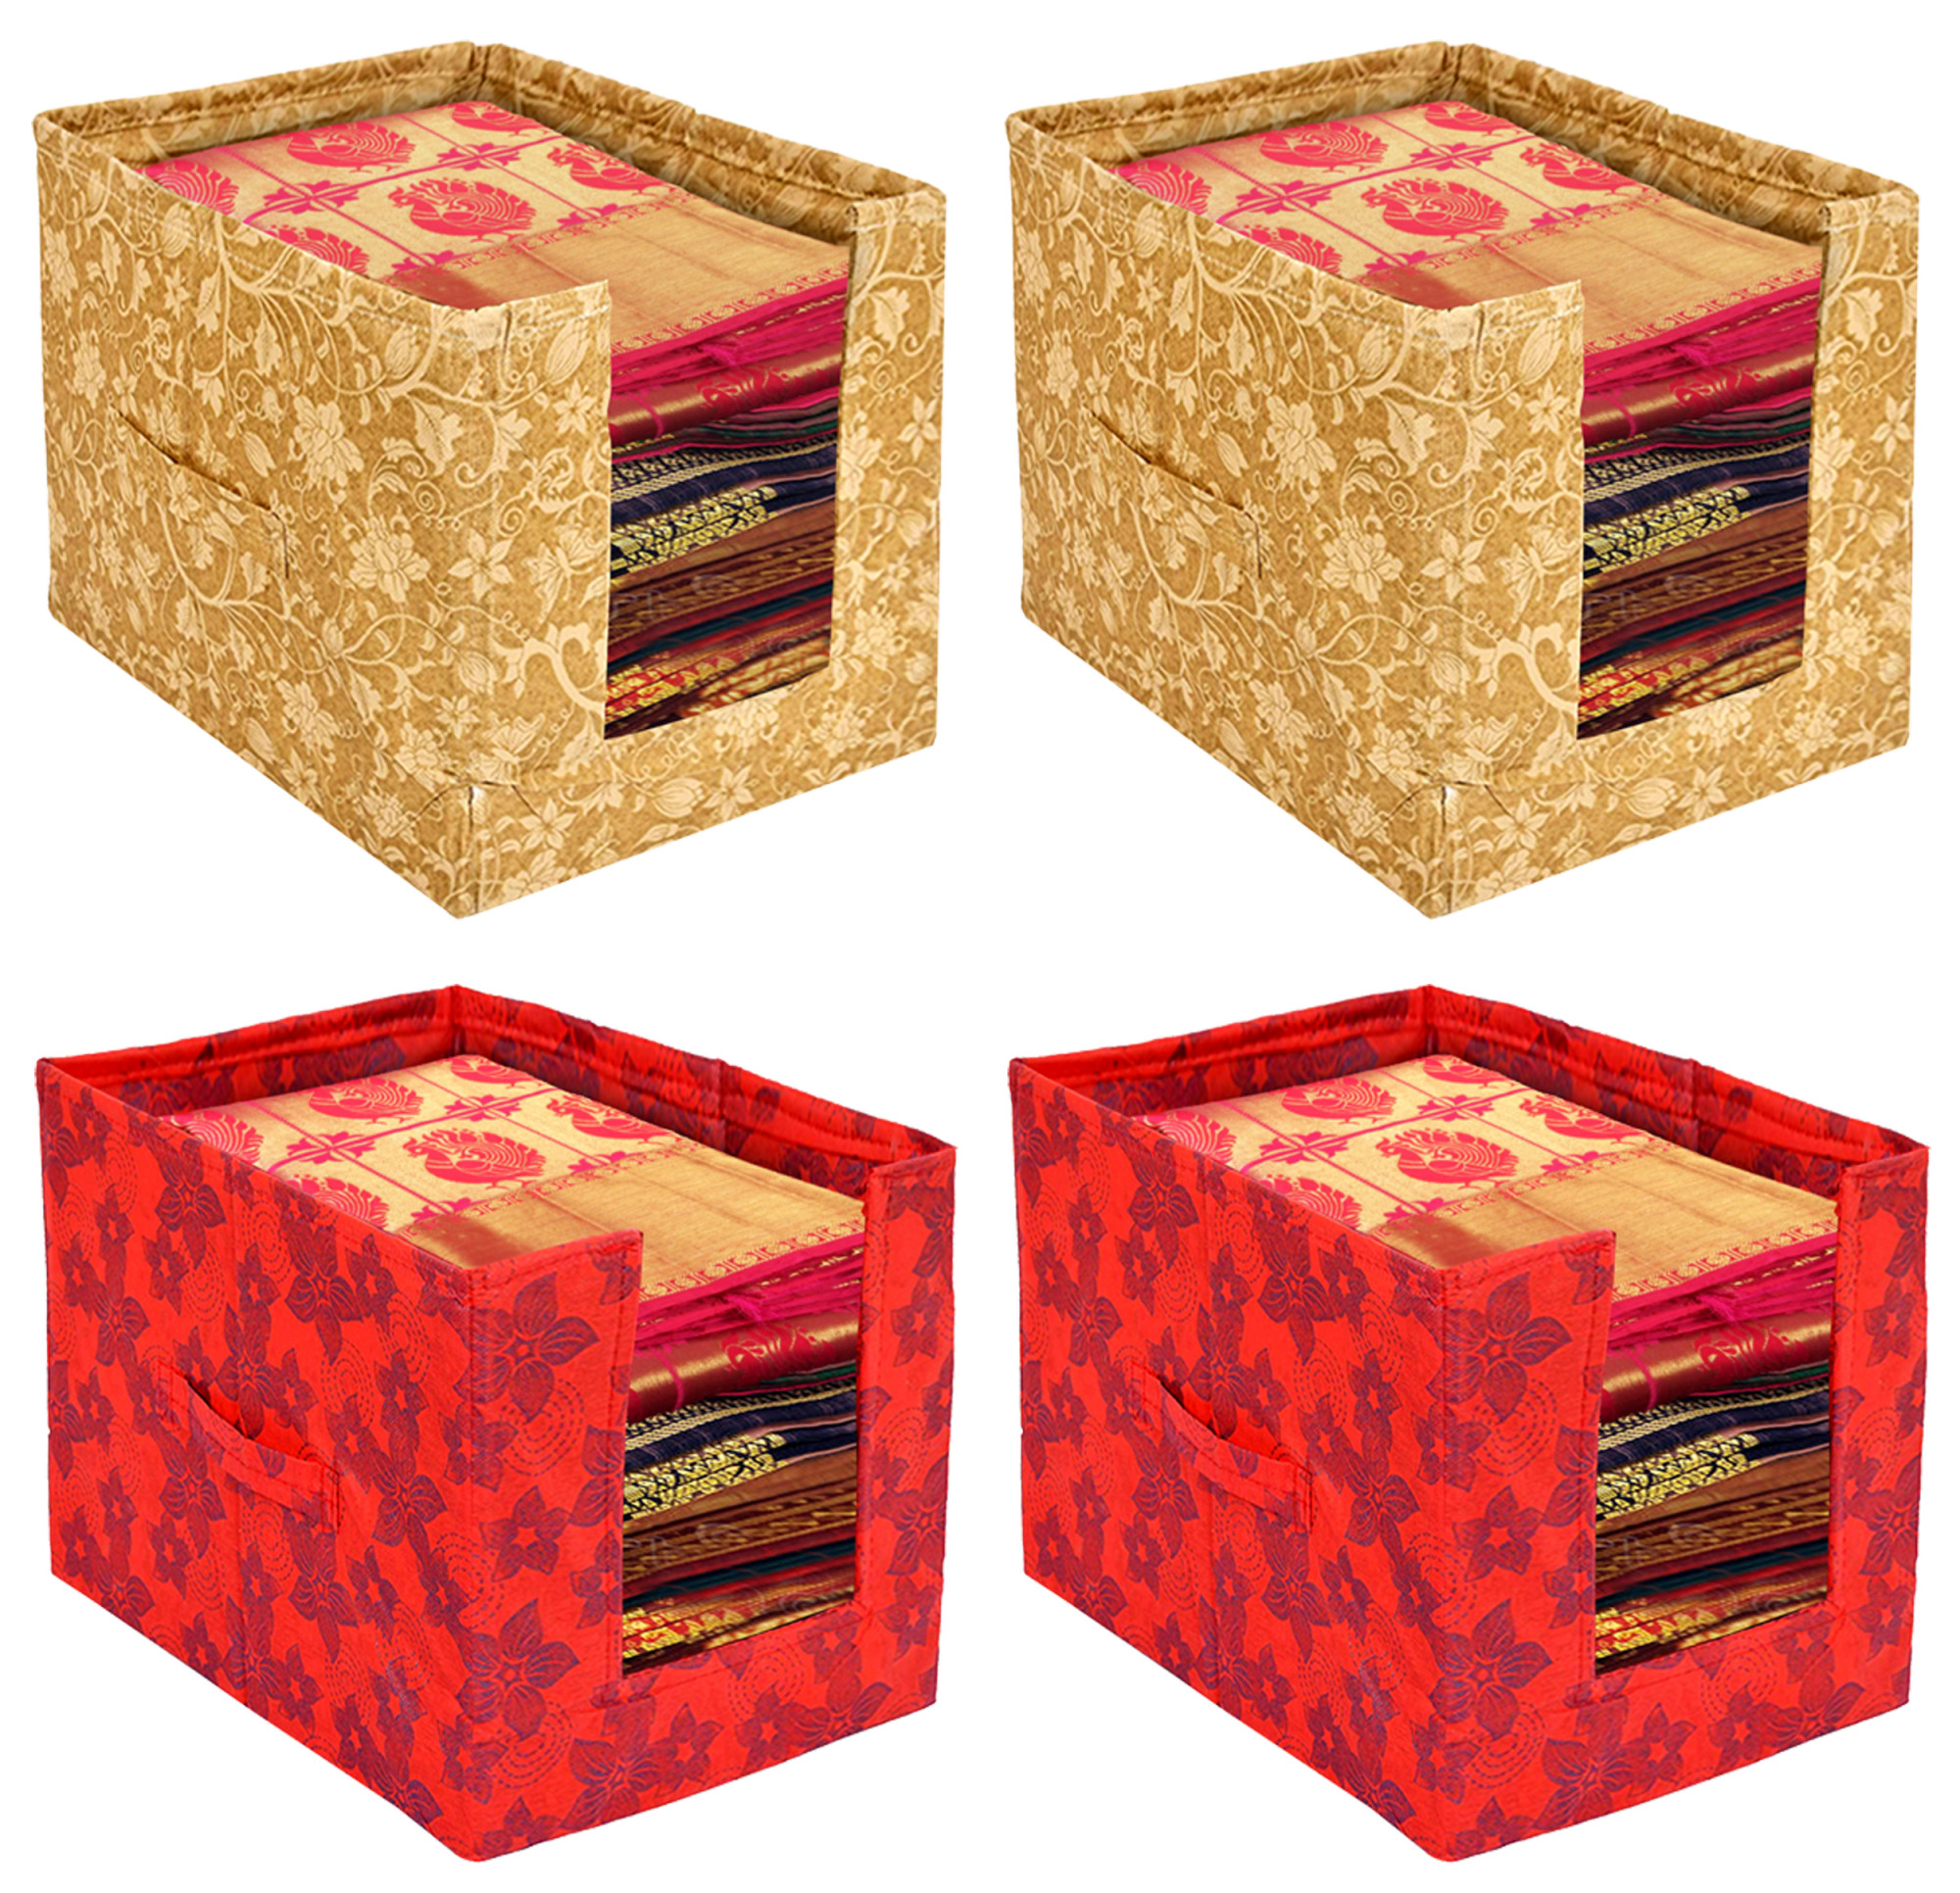 Kuber Industries Metalic Flower Print Foldable Rectangle Cloth Saree Stacker Cloth Wardrobe Organizer- Pack of 4 (Beige & Red)